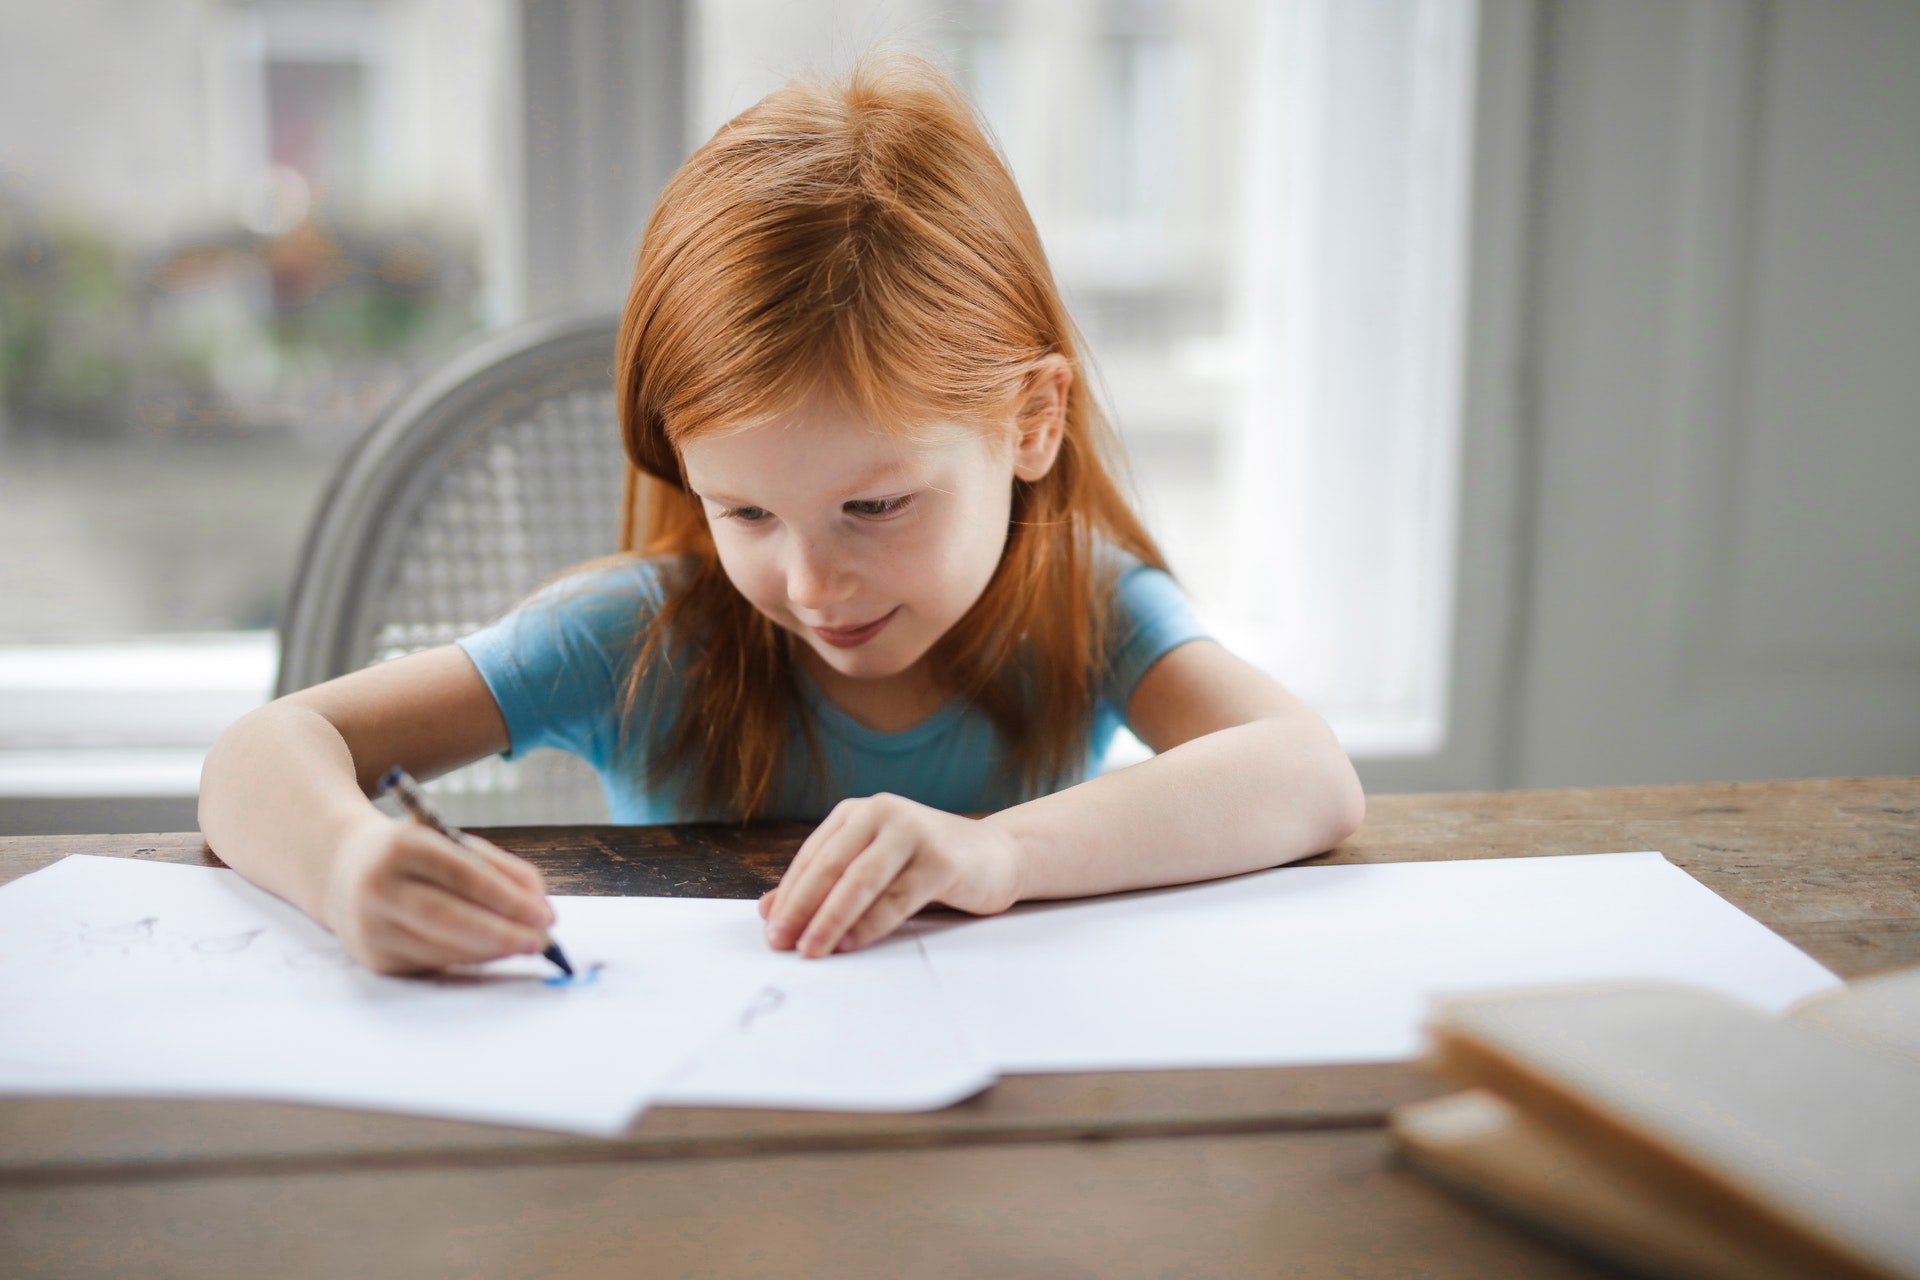 How To Motivate A Child To Write